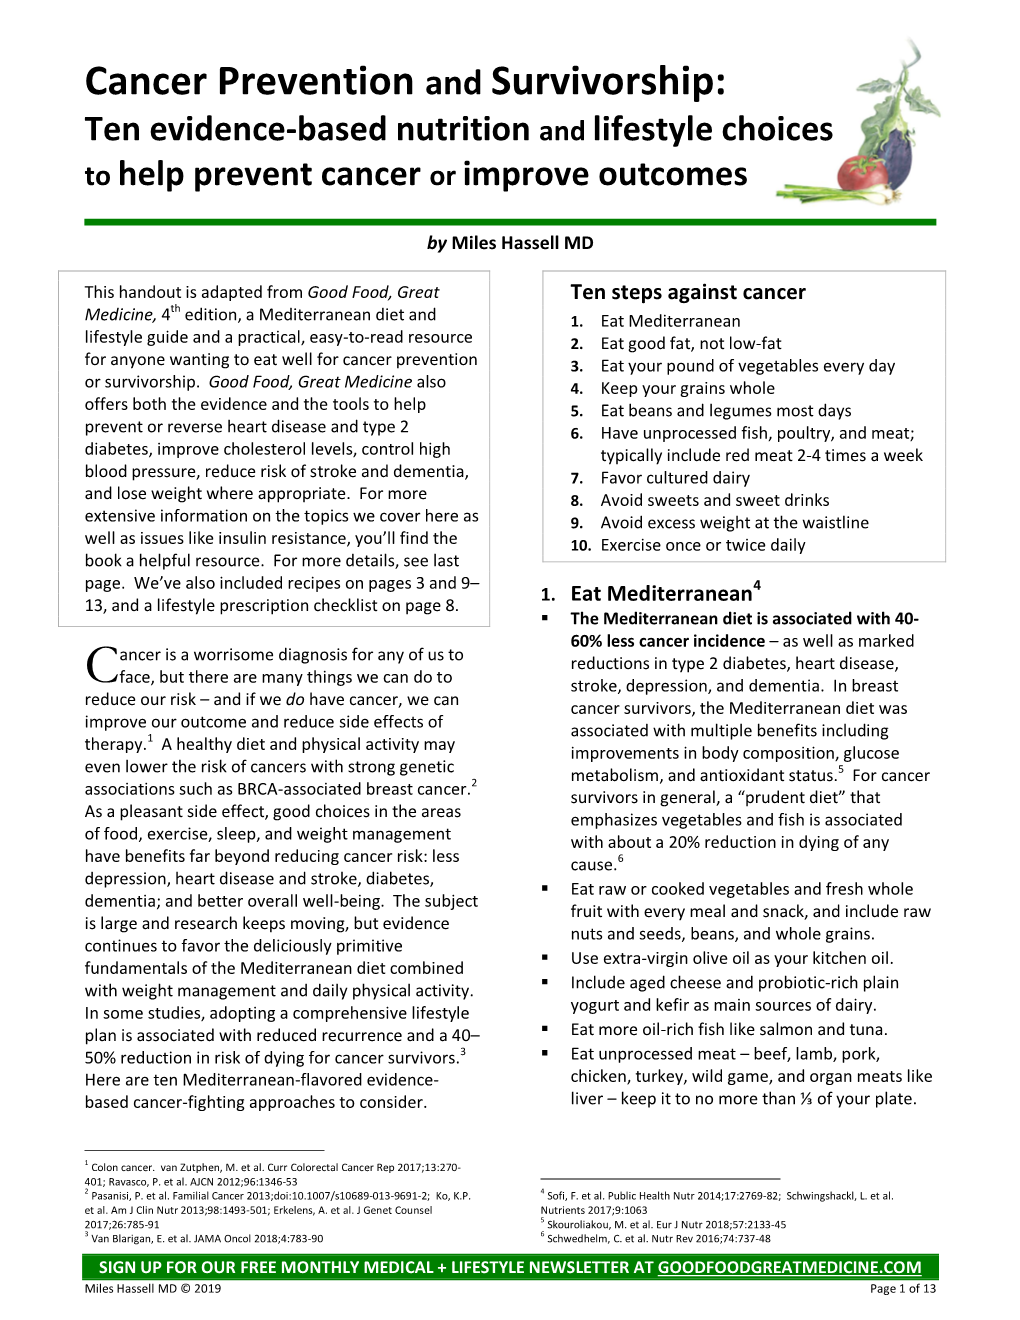 Cancer Prevention and Survivorship: Ten Evidence-Based Nutrition and Lifestyle Choices to Help Prevent Cancer Or Improve Outcomes